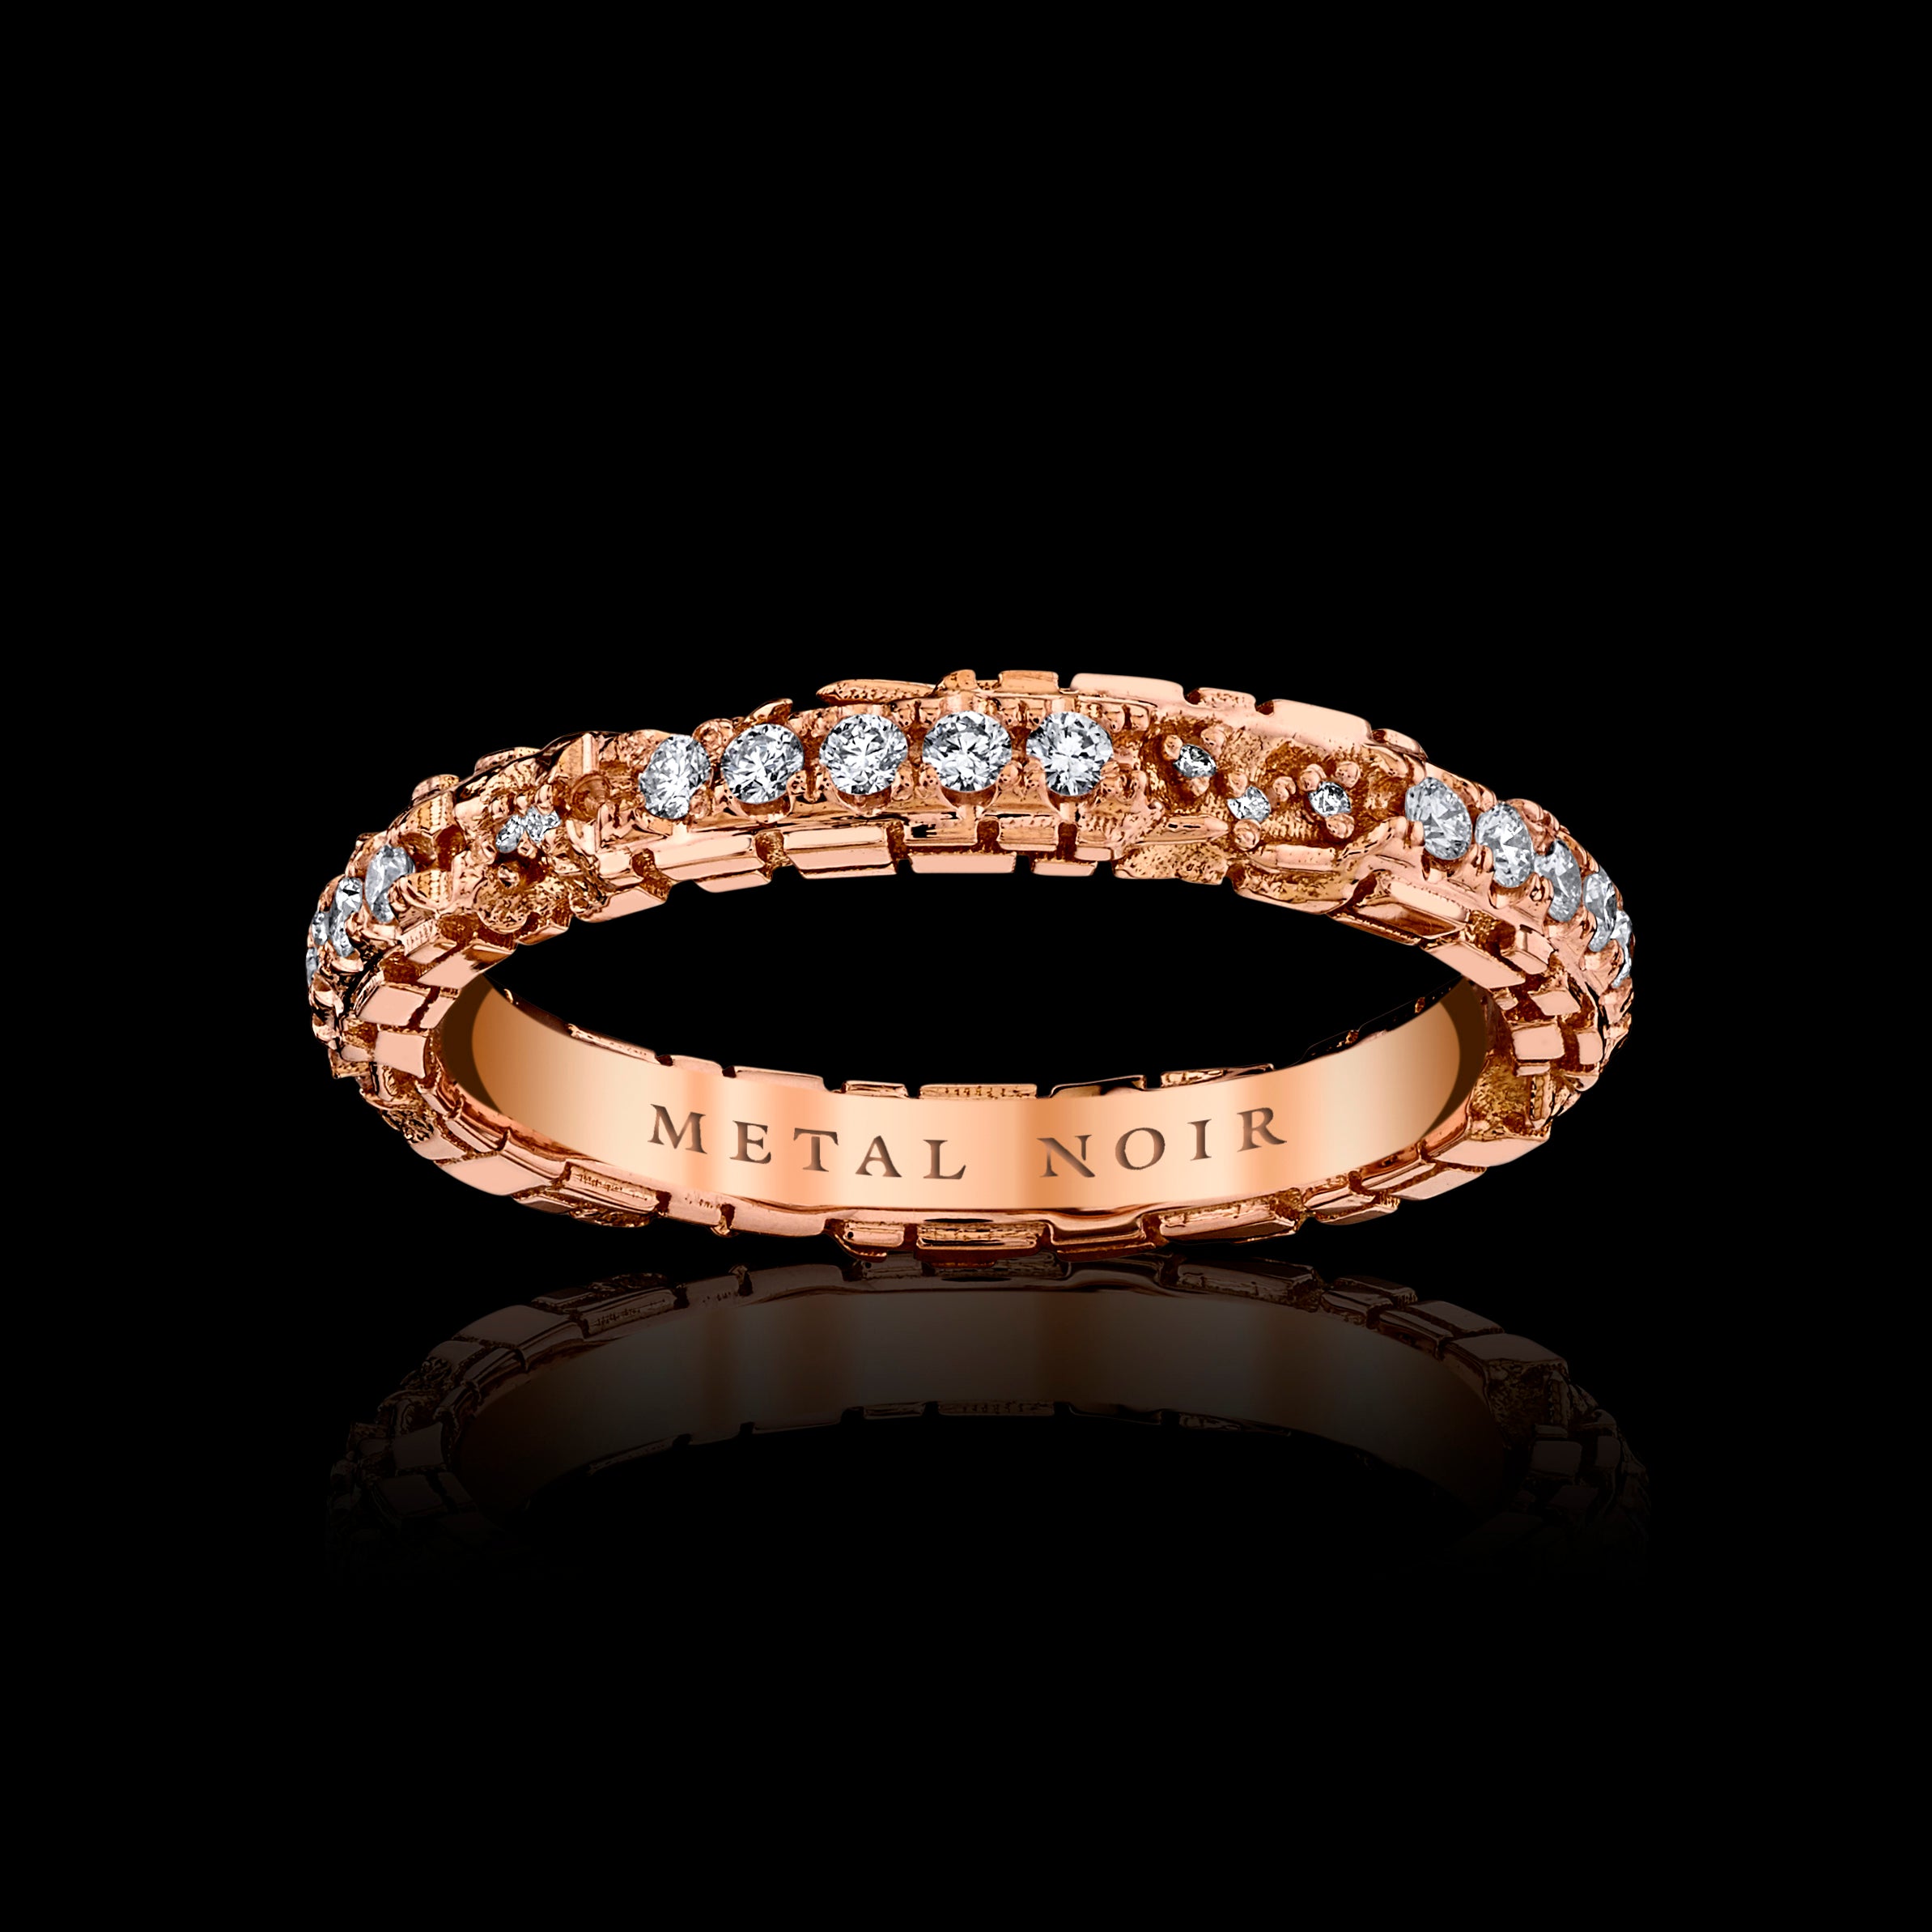 ‘Eroded Architecture’ ULTRATHIN Ring in solid 18k rose gold with diamonds • Edition of 30